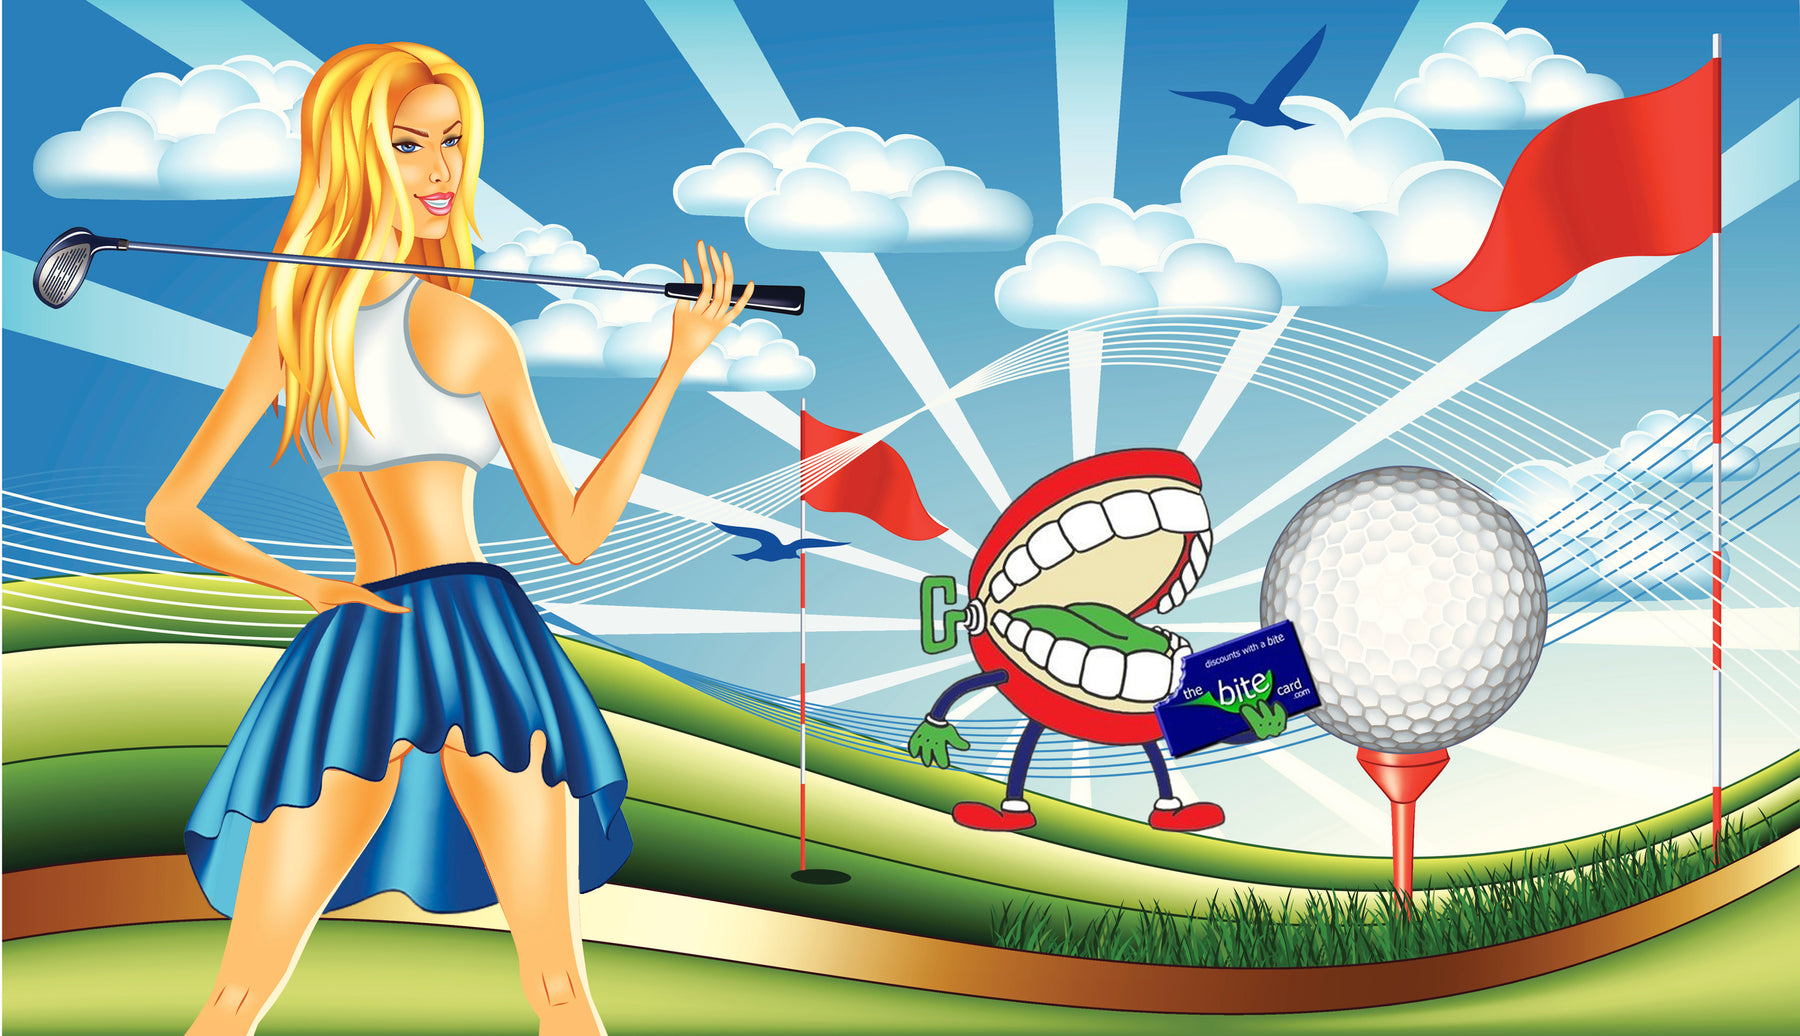 girl on golf course holding a golf club with bite card mascot ready to play a round at tee time